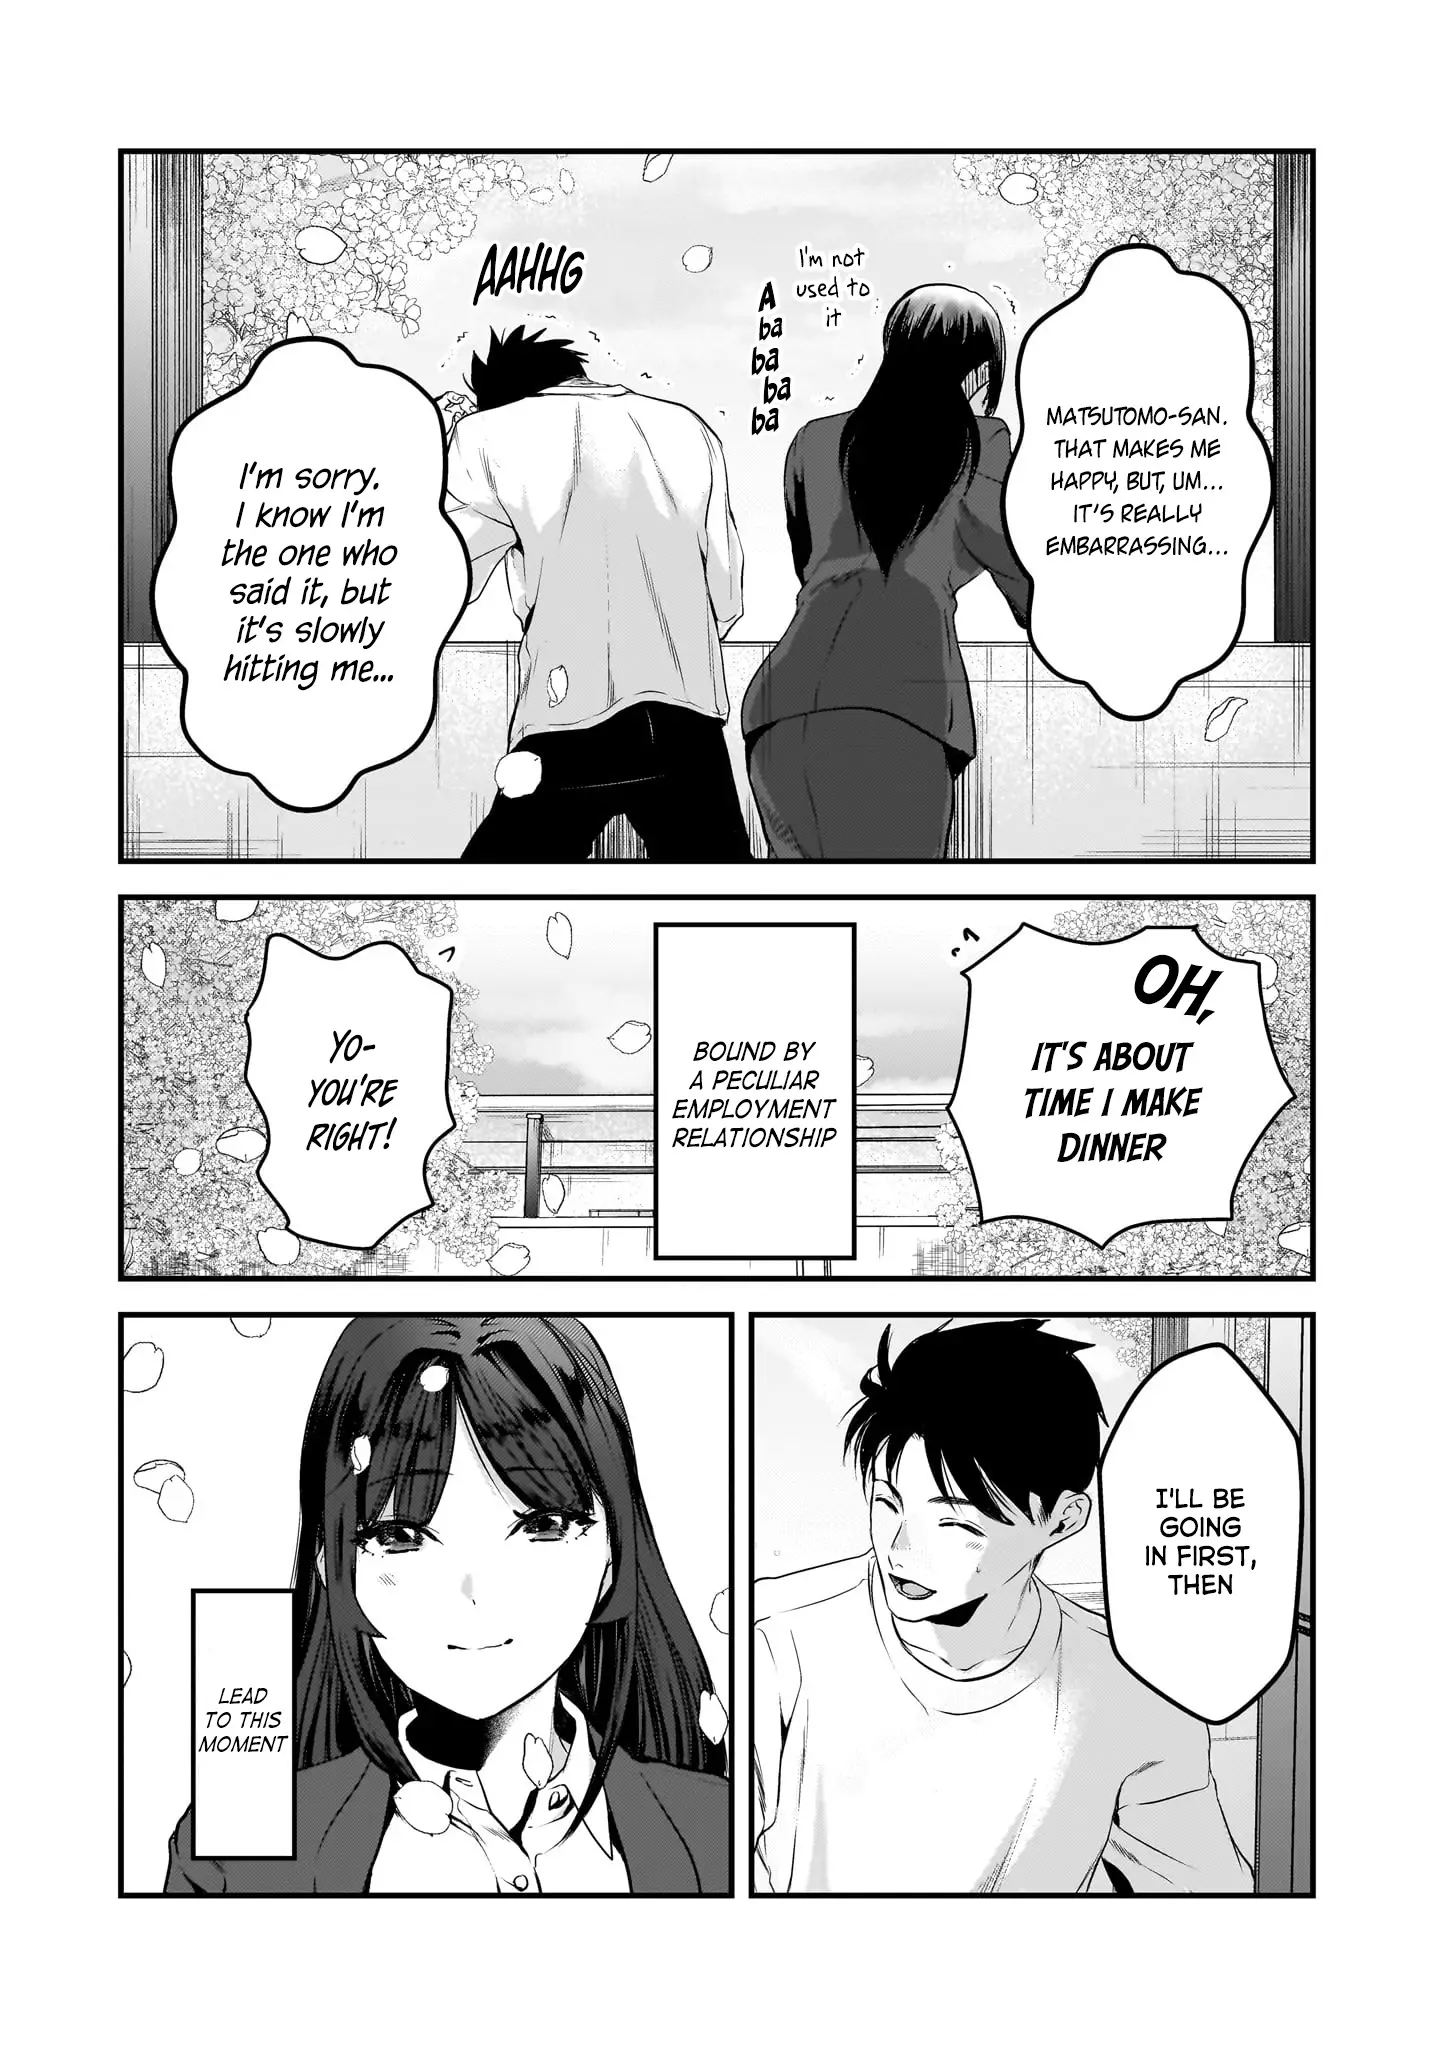 It’S Fun Having A 300,000 Yen A Month Job Welcoming Home An Onee-San Who Doesn’T Find Meaning In A Job That Pays Her 500,000 Yen A Month - 30 page 35-b01d201f